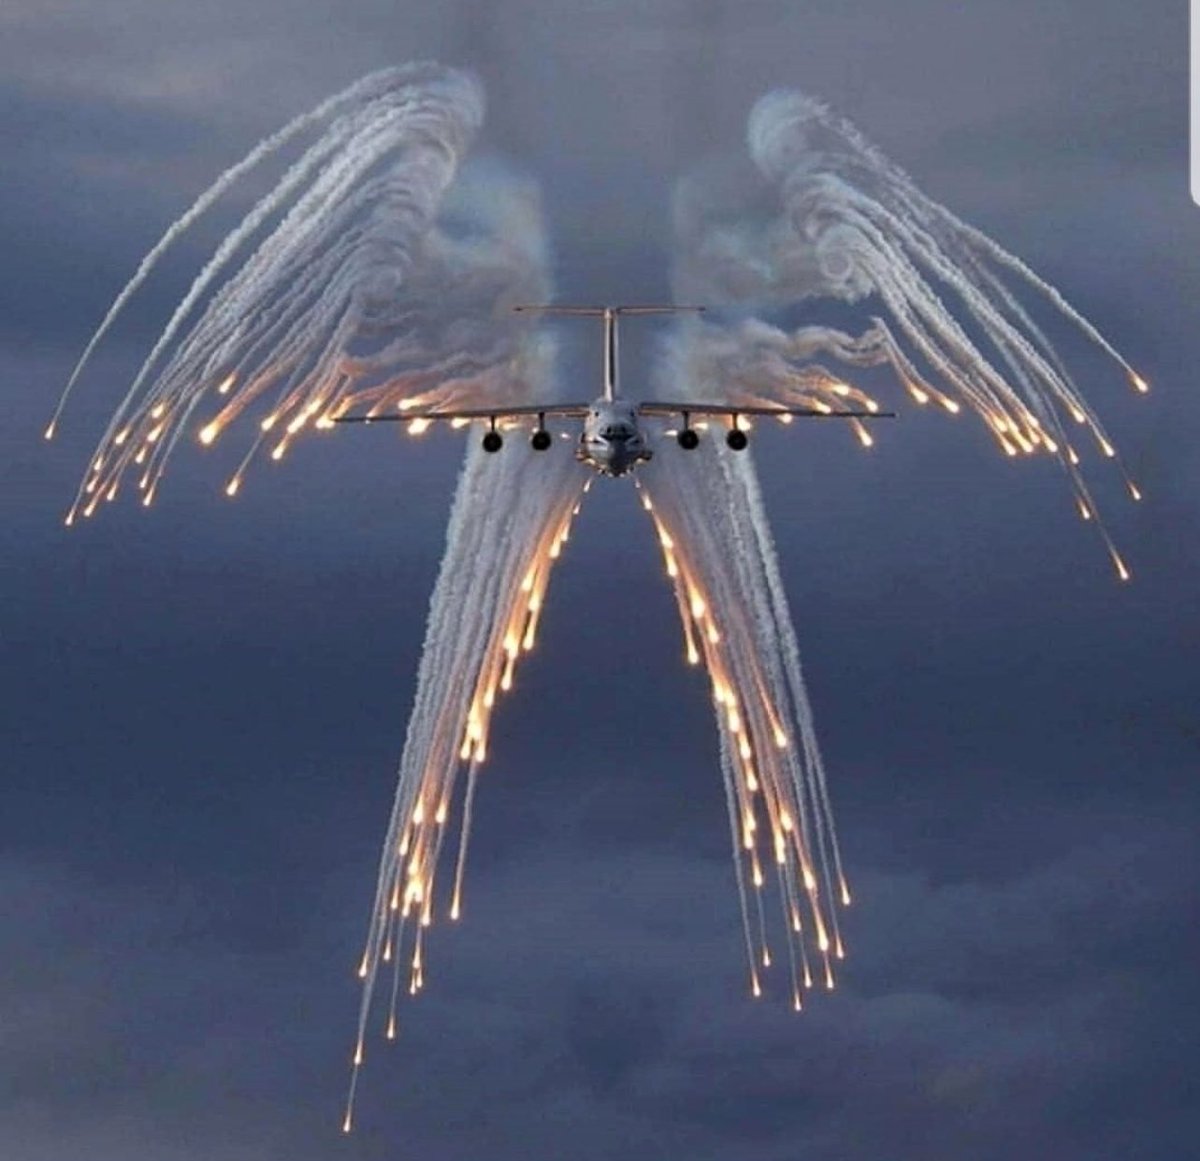 The flare patterns of this aircraft looks like angel's wings